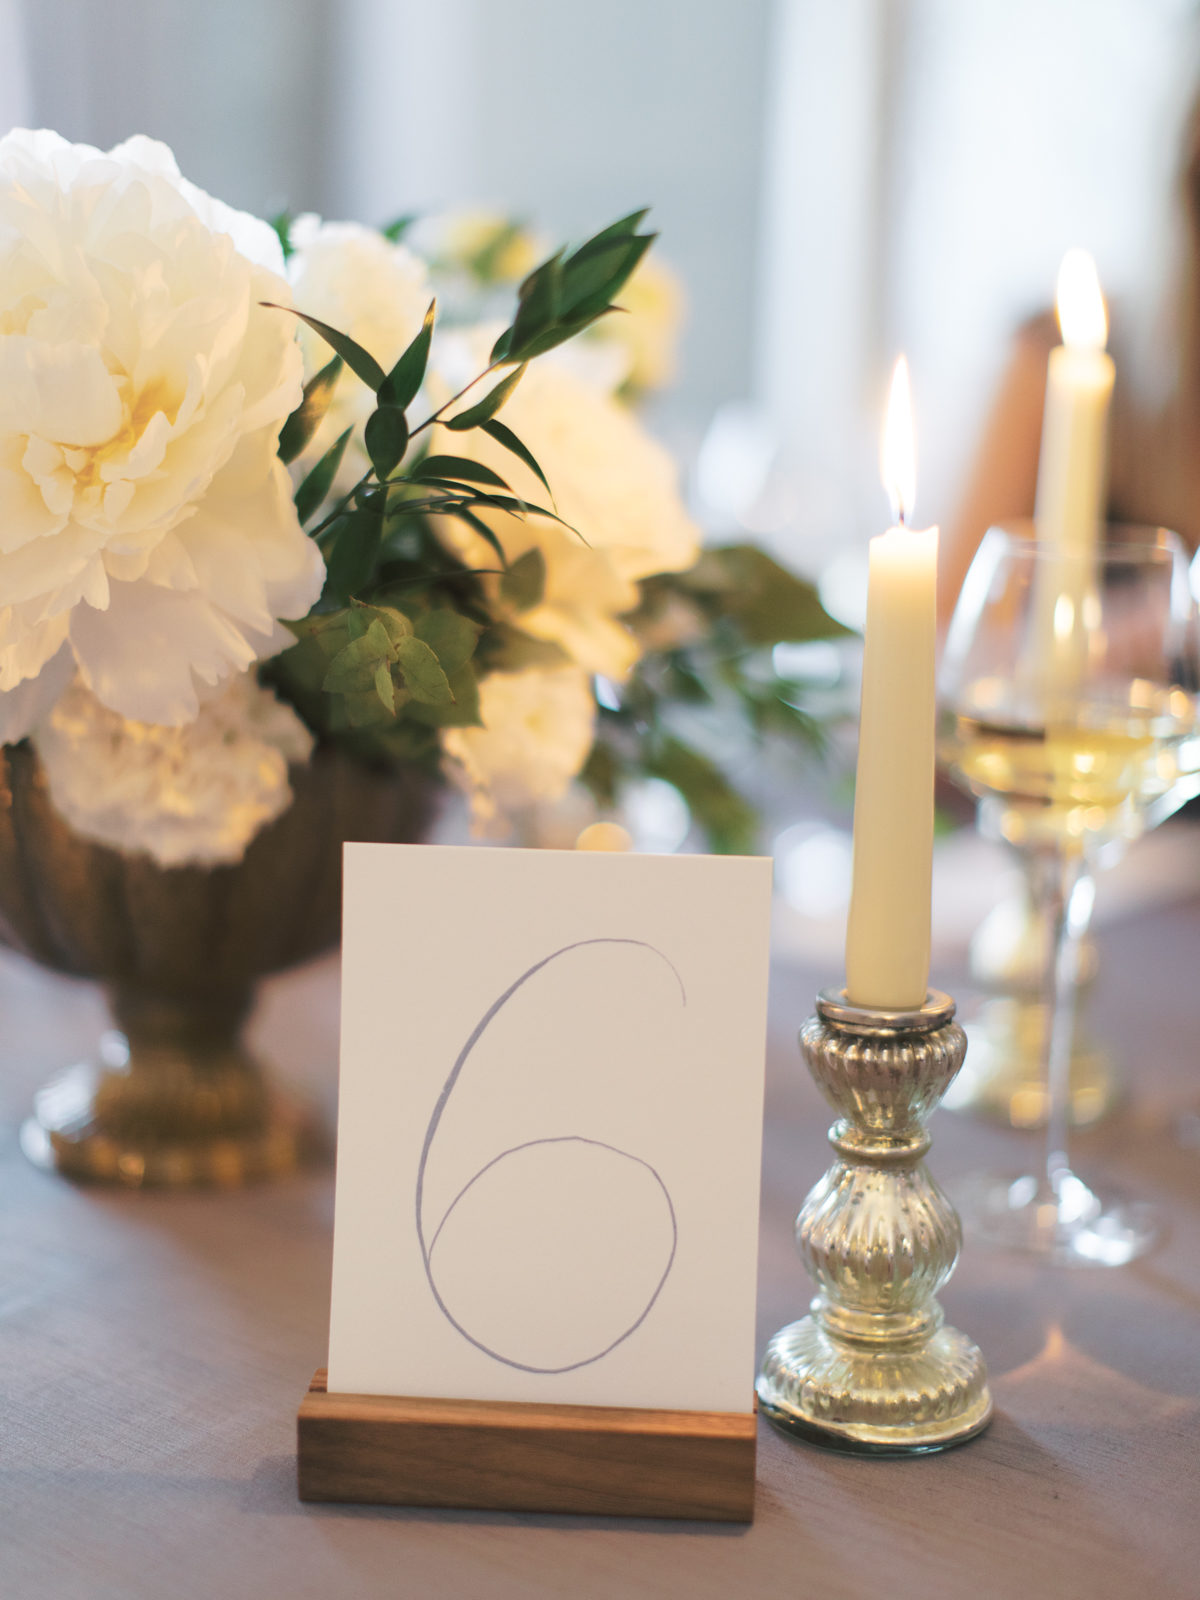 Ireland Film Photographer | Molly Carr Photography | Romantic Wedding Reception Decor with Calligraphy Table Number and White Roses by Candlelight